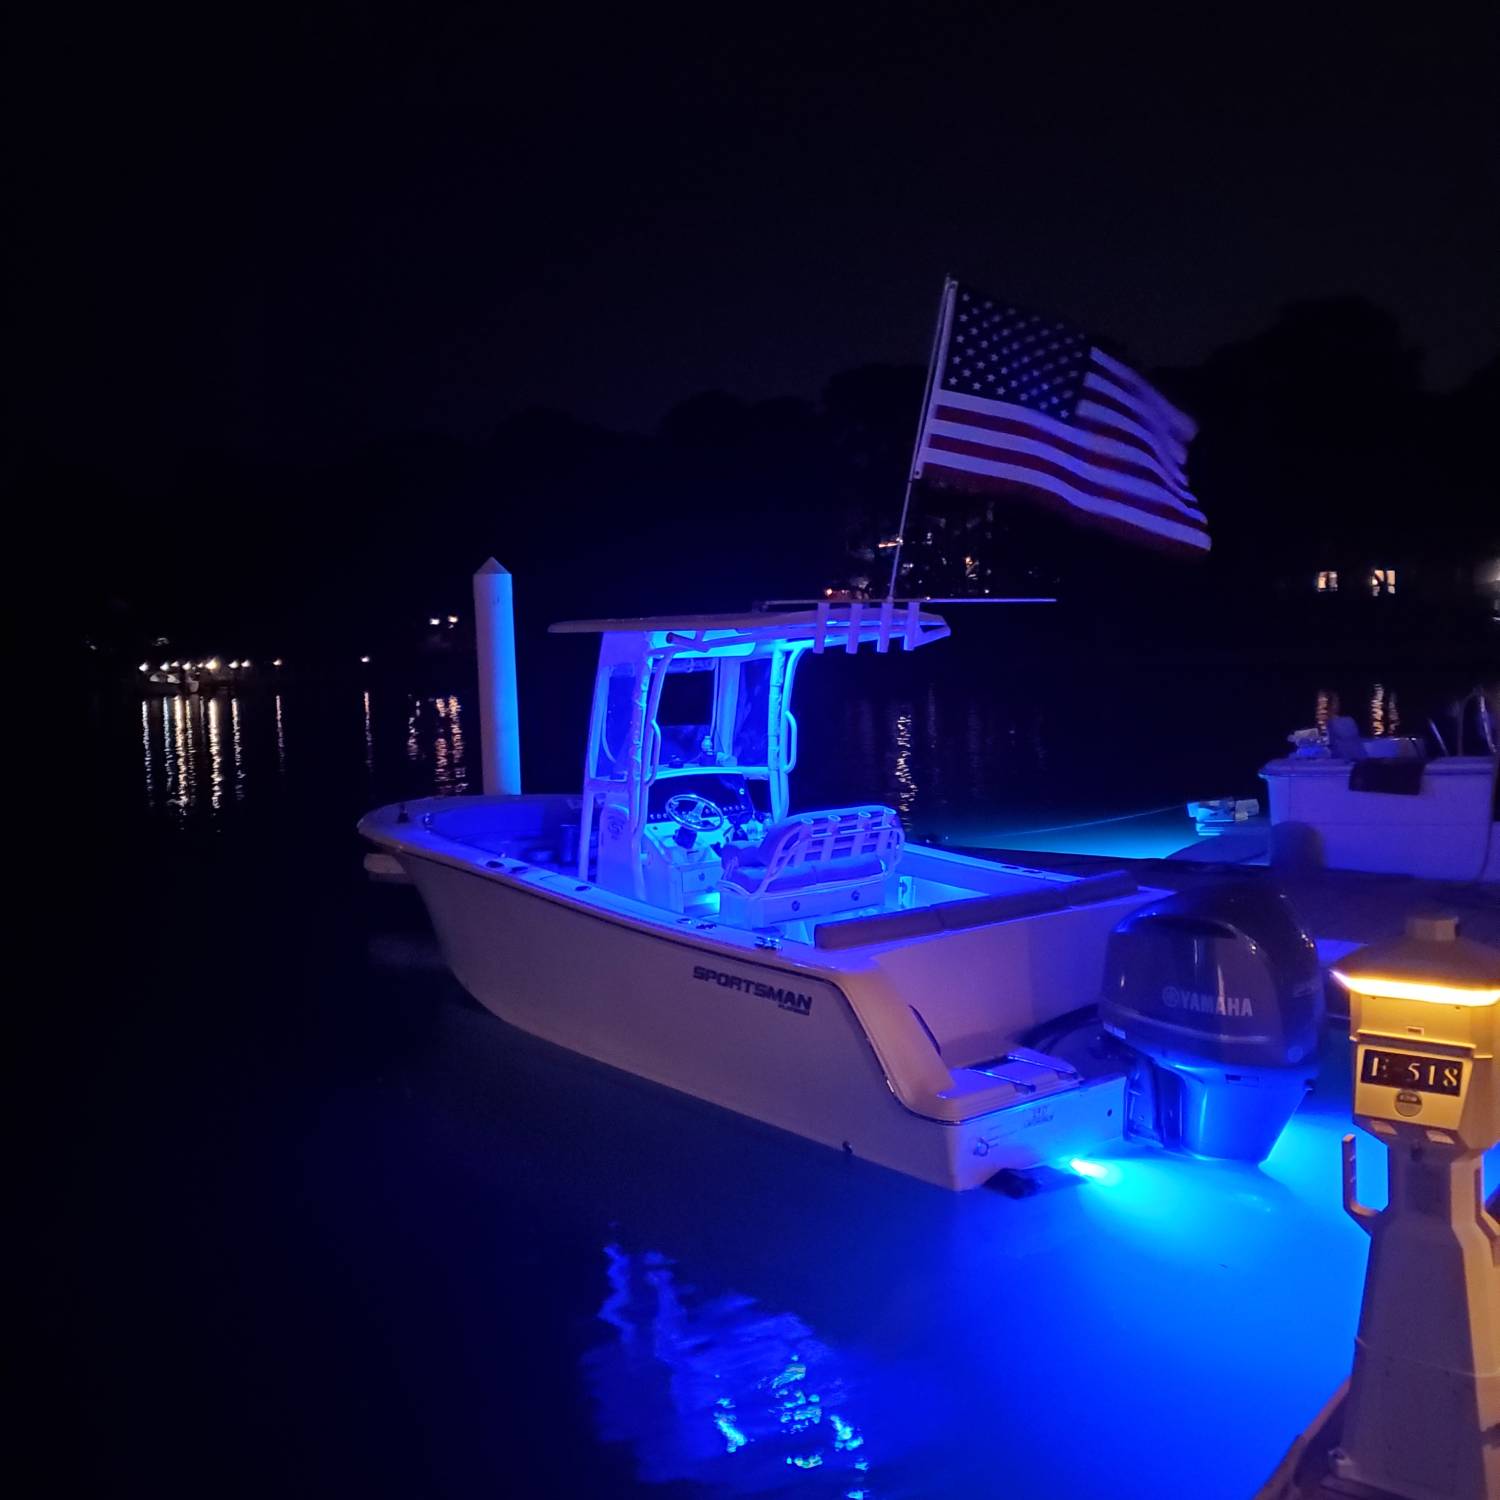 Title: Dinner at night - On board their Sportsman Heritage 231 Center Console - Location: Long Creek, Virginia Beach. Participating in the Photo Contest #SportsmanJune2023